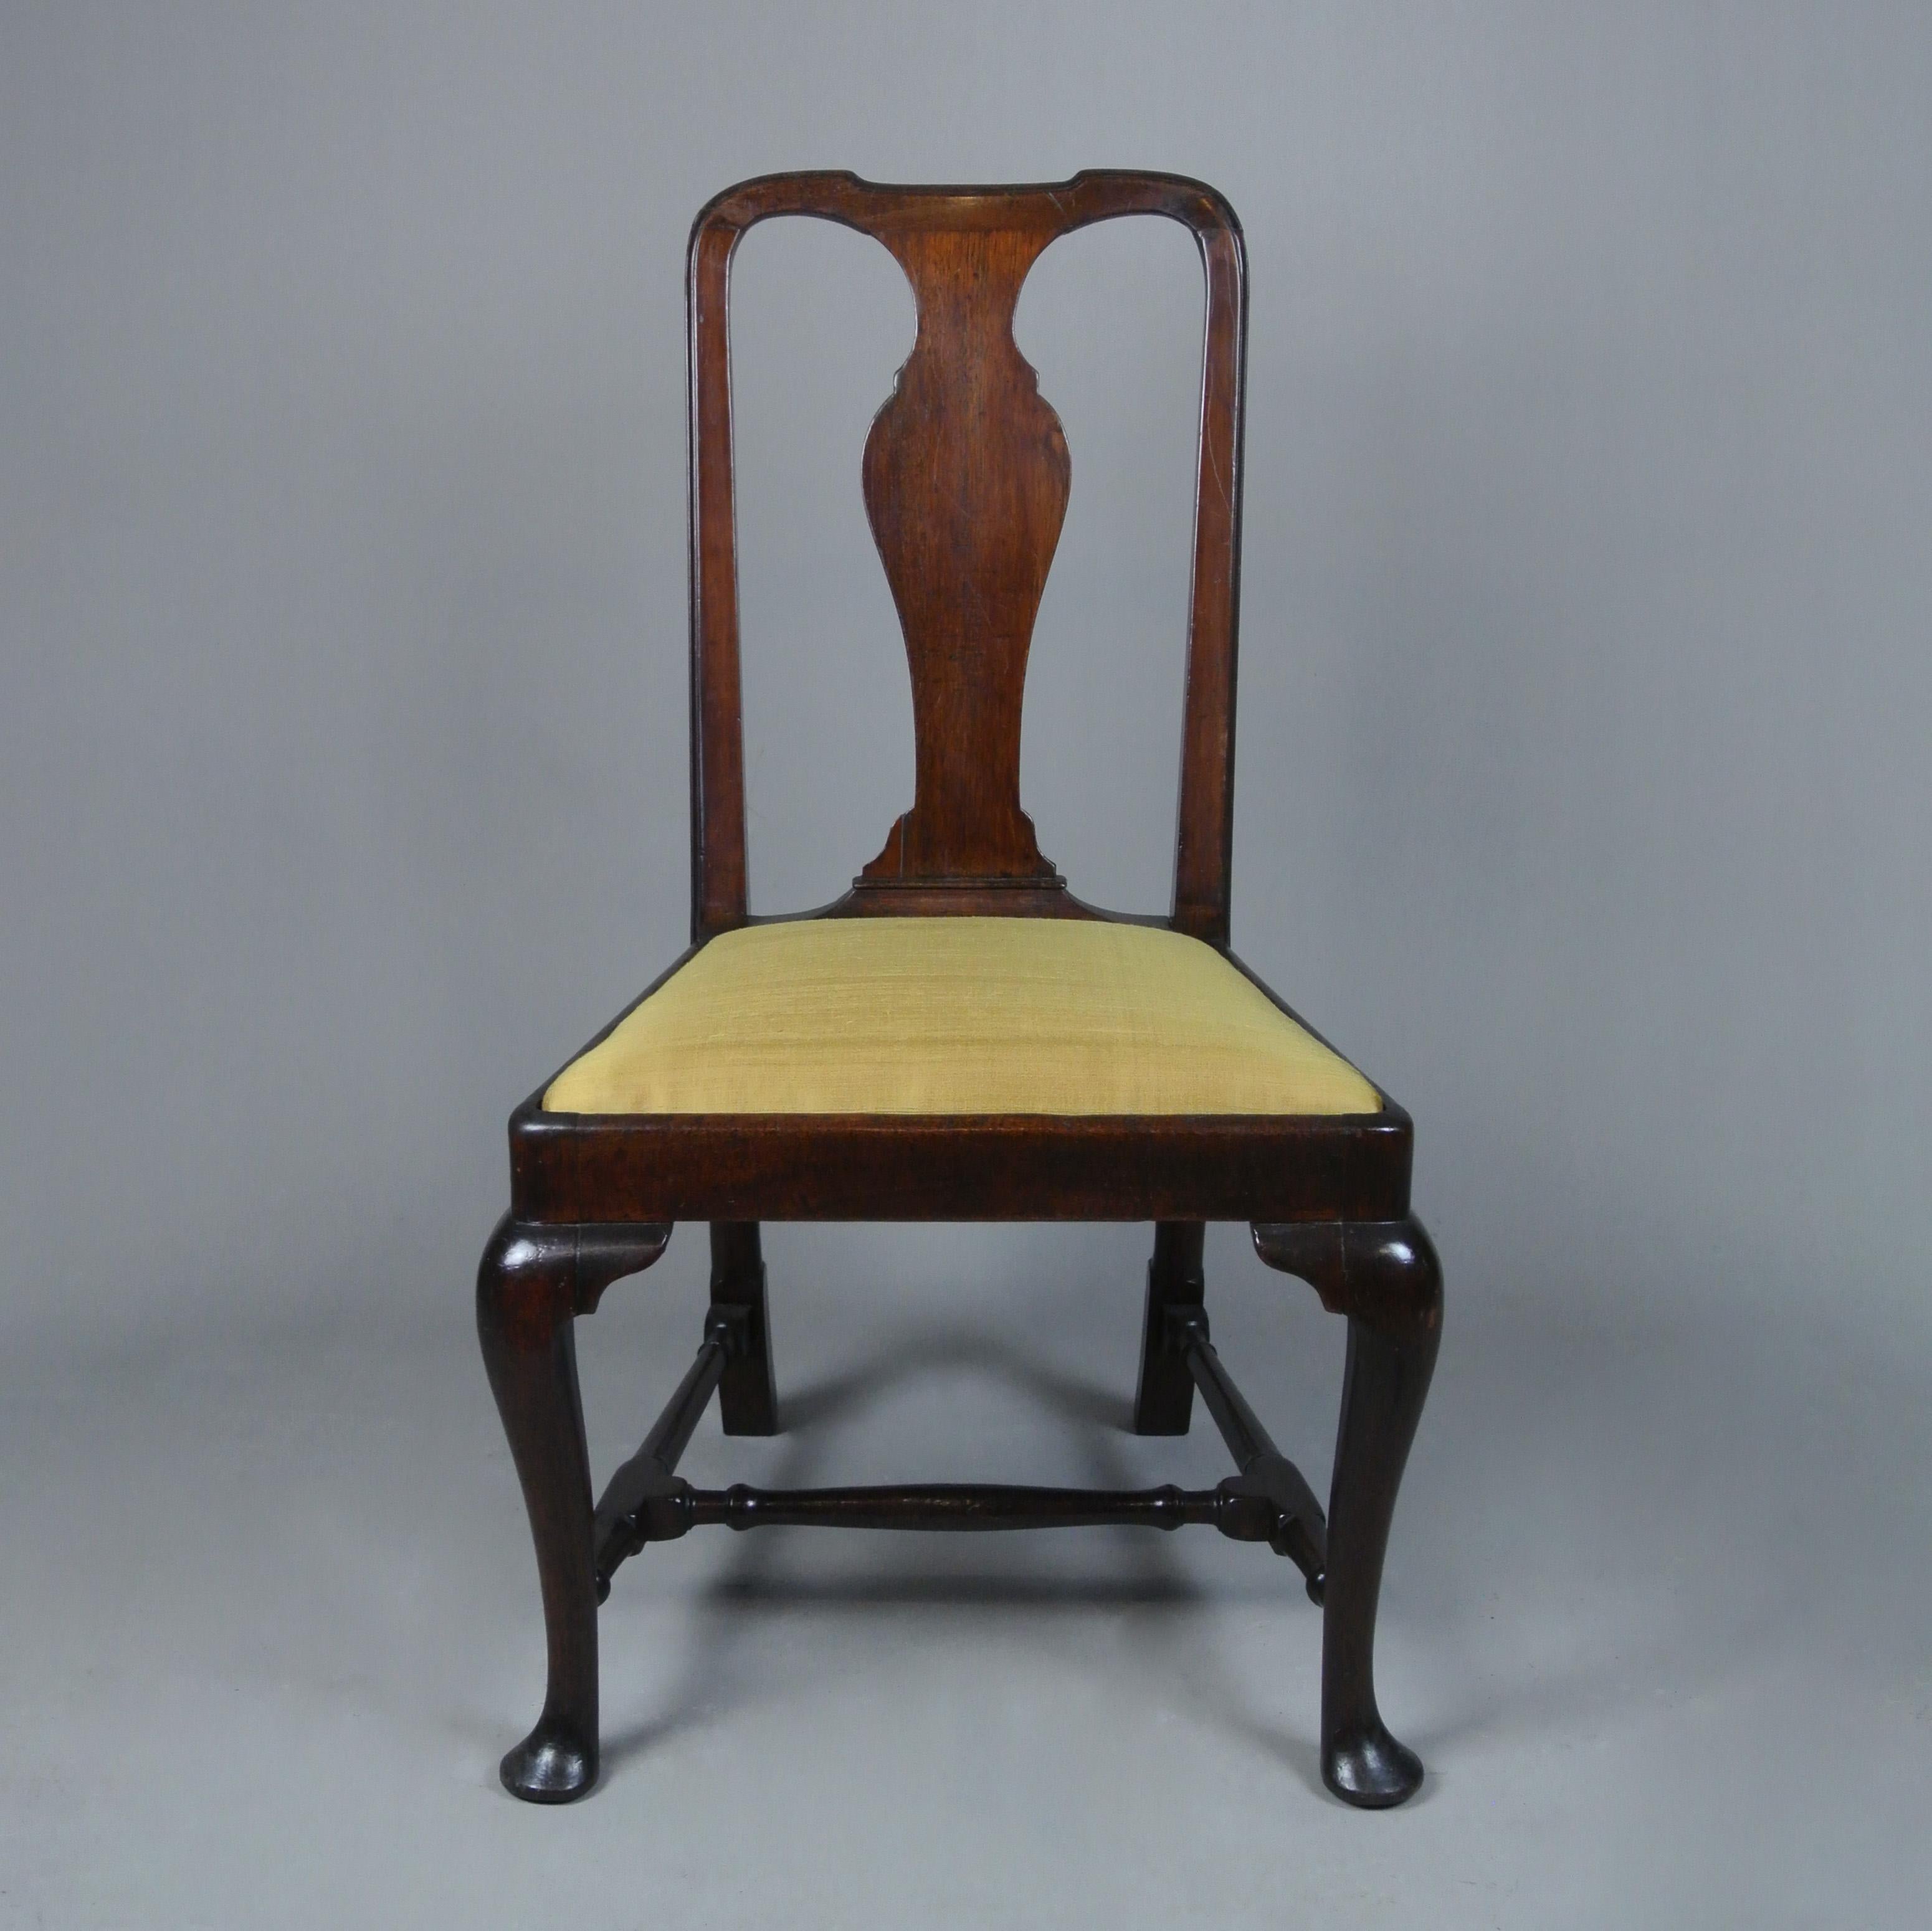 A really beautiful English side chair c. 1740 with well proportioned and completely original frame, the curved splat was a very difficult element to carve and demonstrates a skilled maker.  This is a high quality detail as are the ring turned